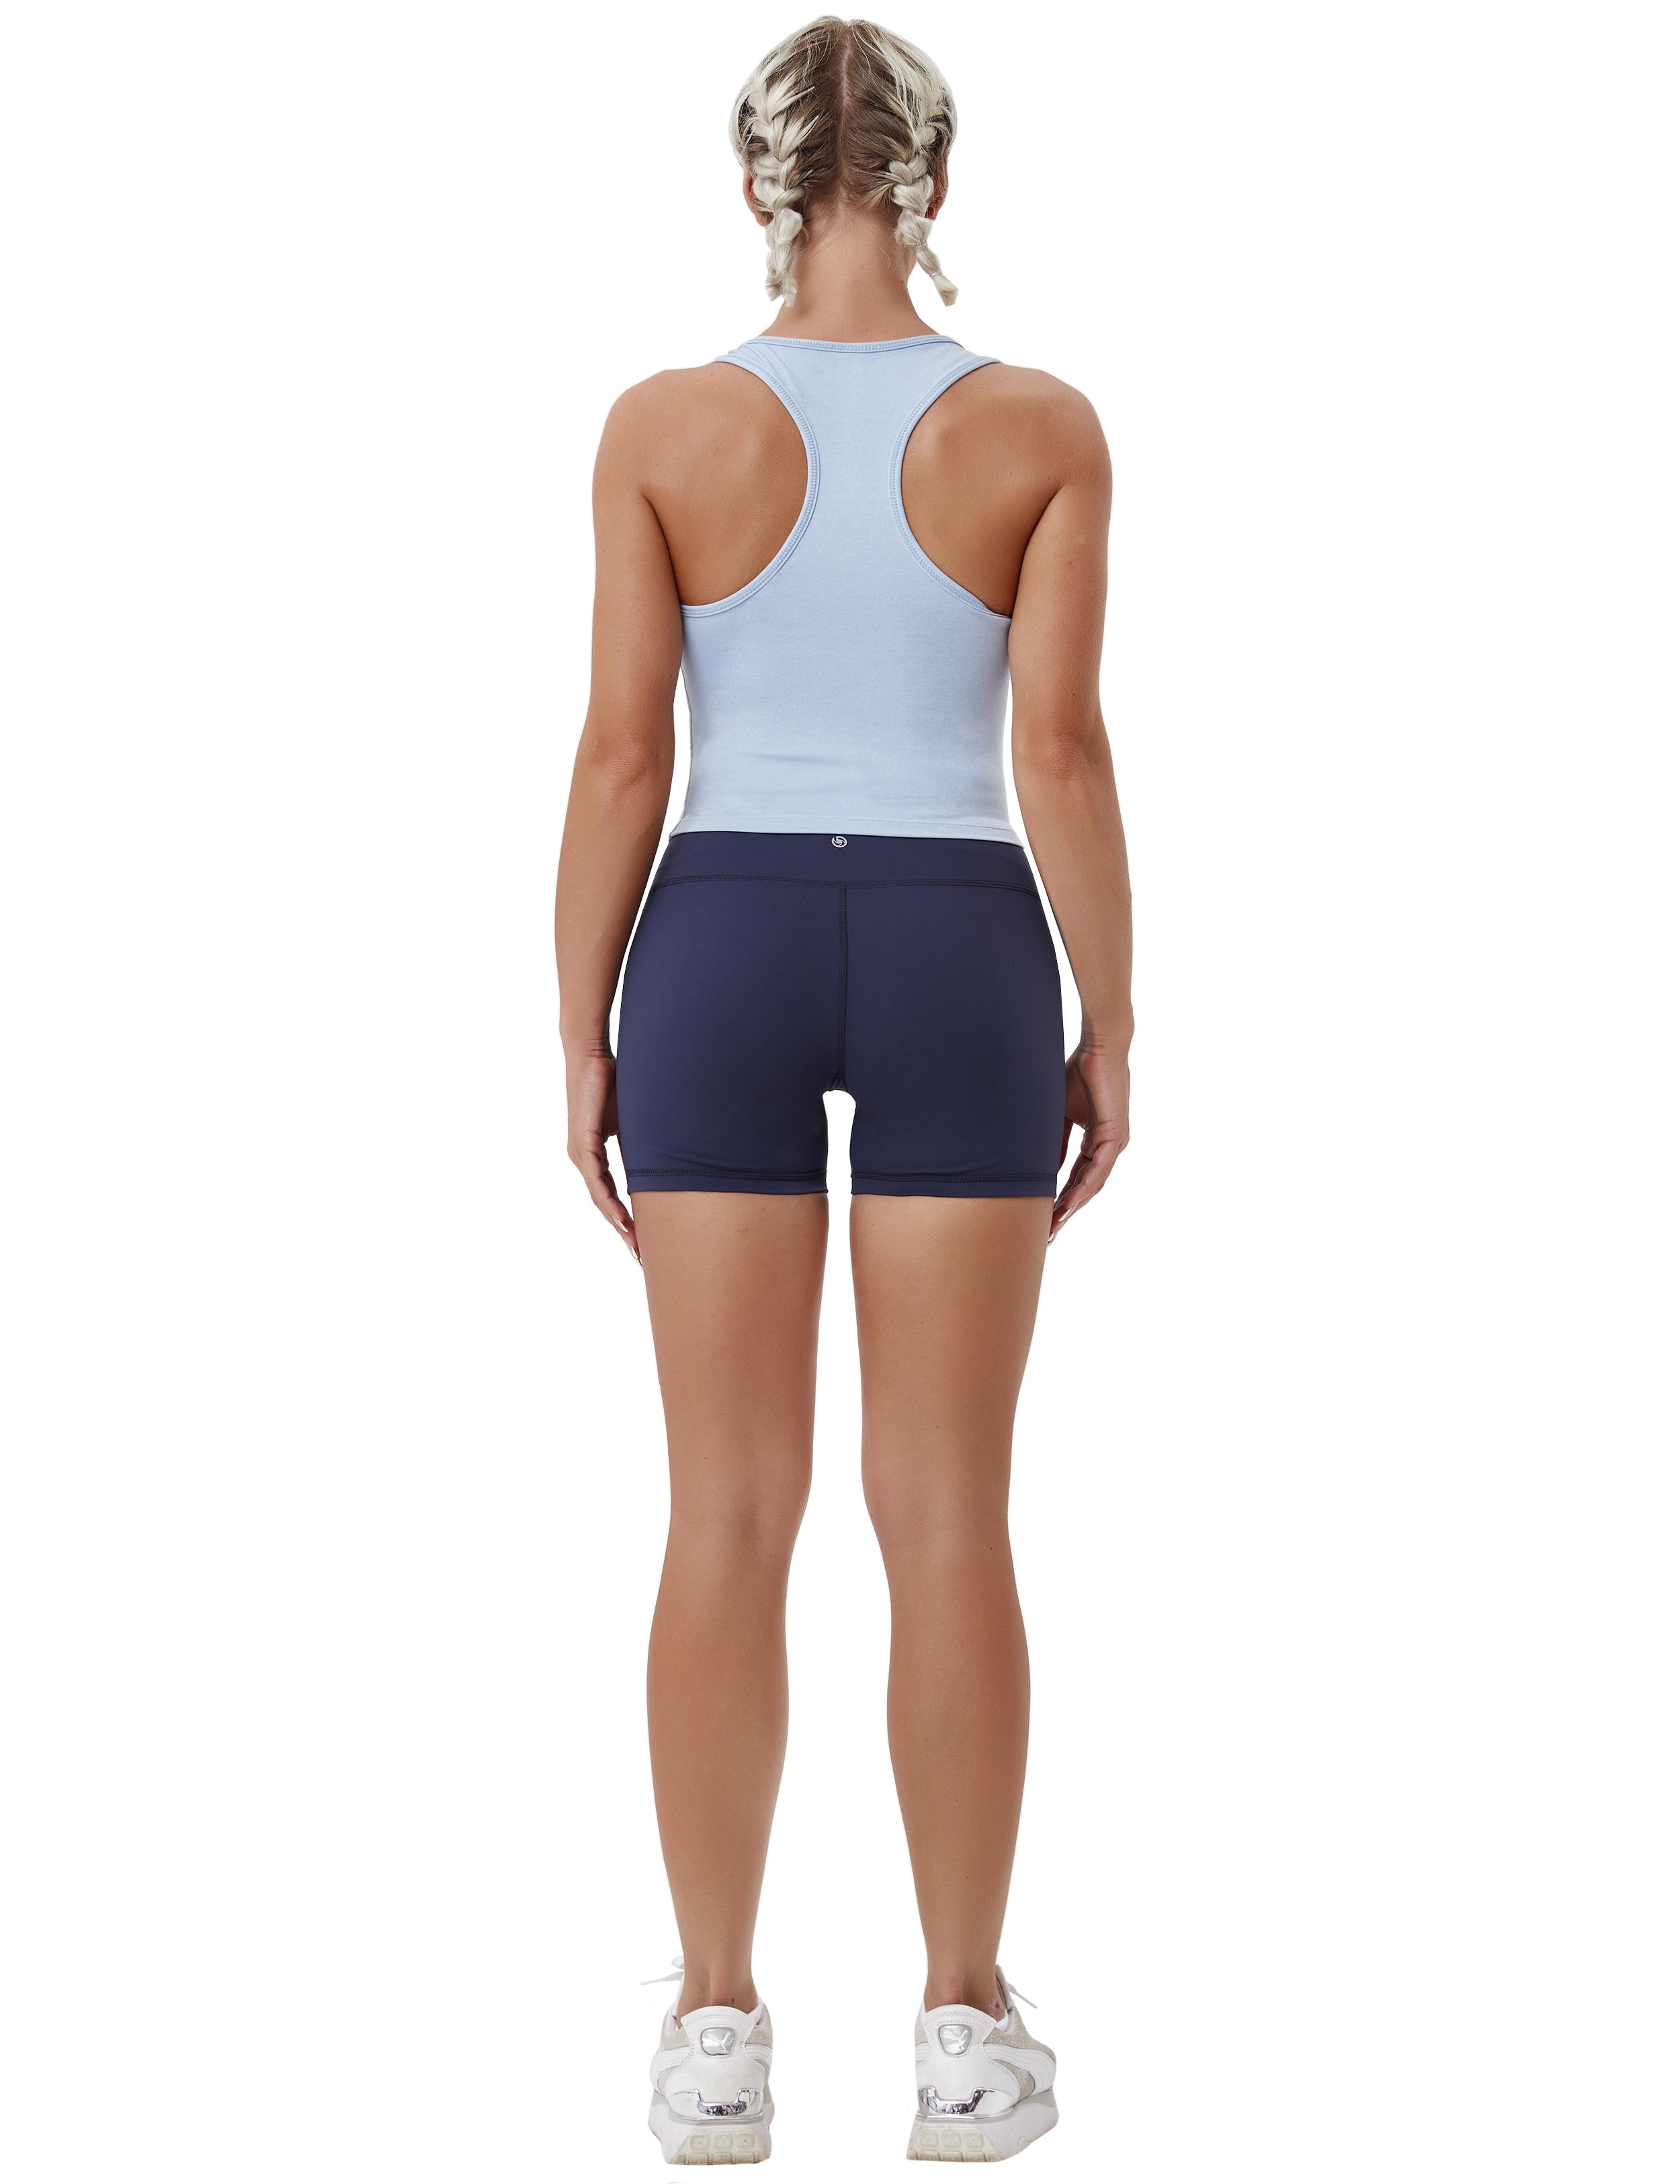 Racerback Athletic Crop Tank Tops heatherblue 92%Nylon/8%Spandex(Cotton Soft) Designed for Jogging Tight Fit So buttery soft, it feels weightless Sweat-wicking Four-way stretch Breathable Contours your body Sits below the waistband for moderate, everyday coverage